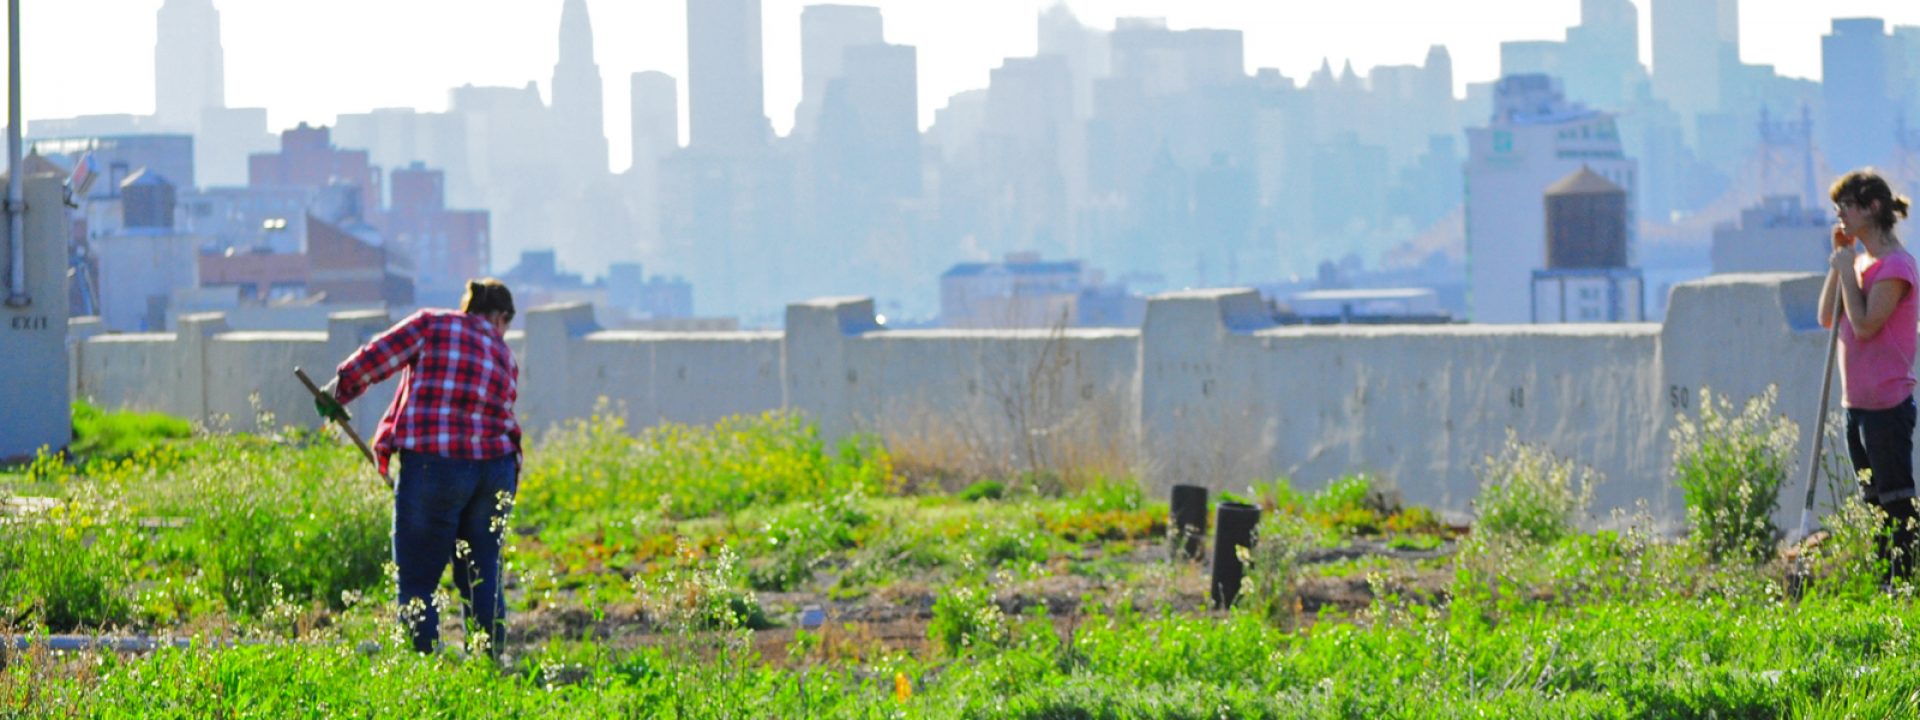 Urban agriculture: concrete can be green